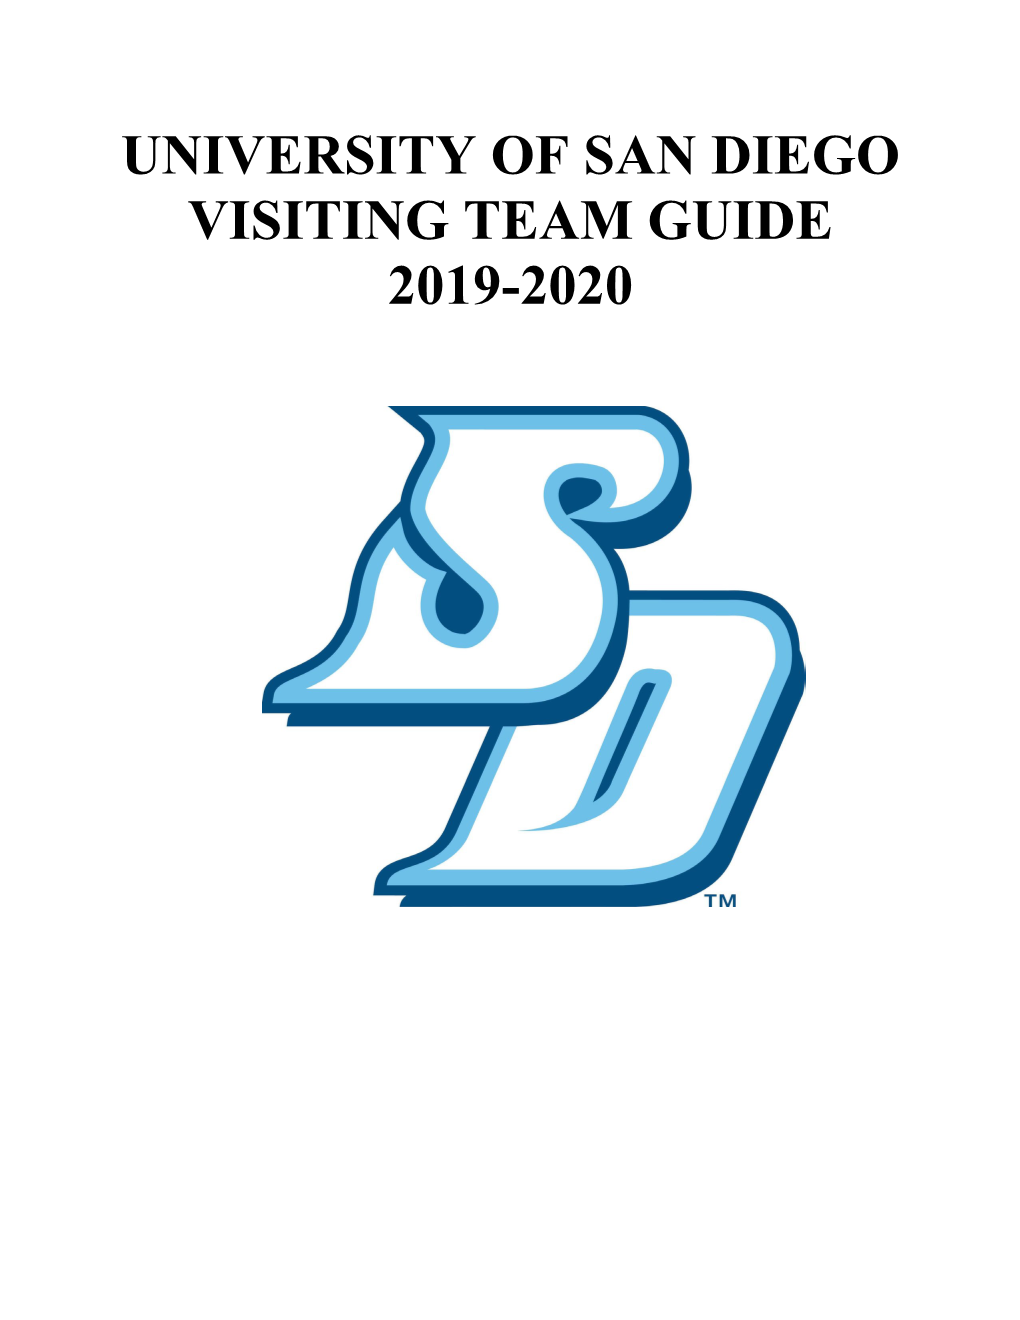 University of San Diego Visiting Team Guide 2019-2020